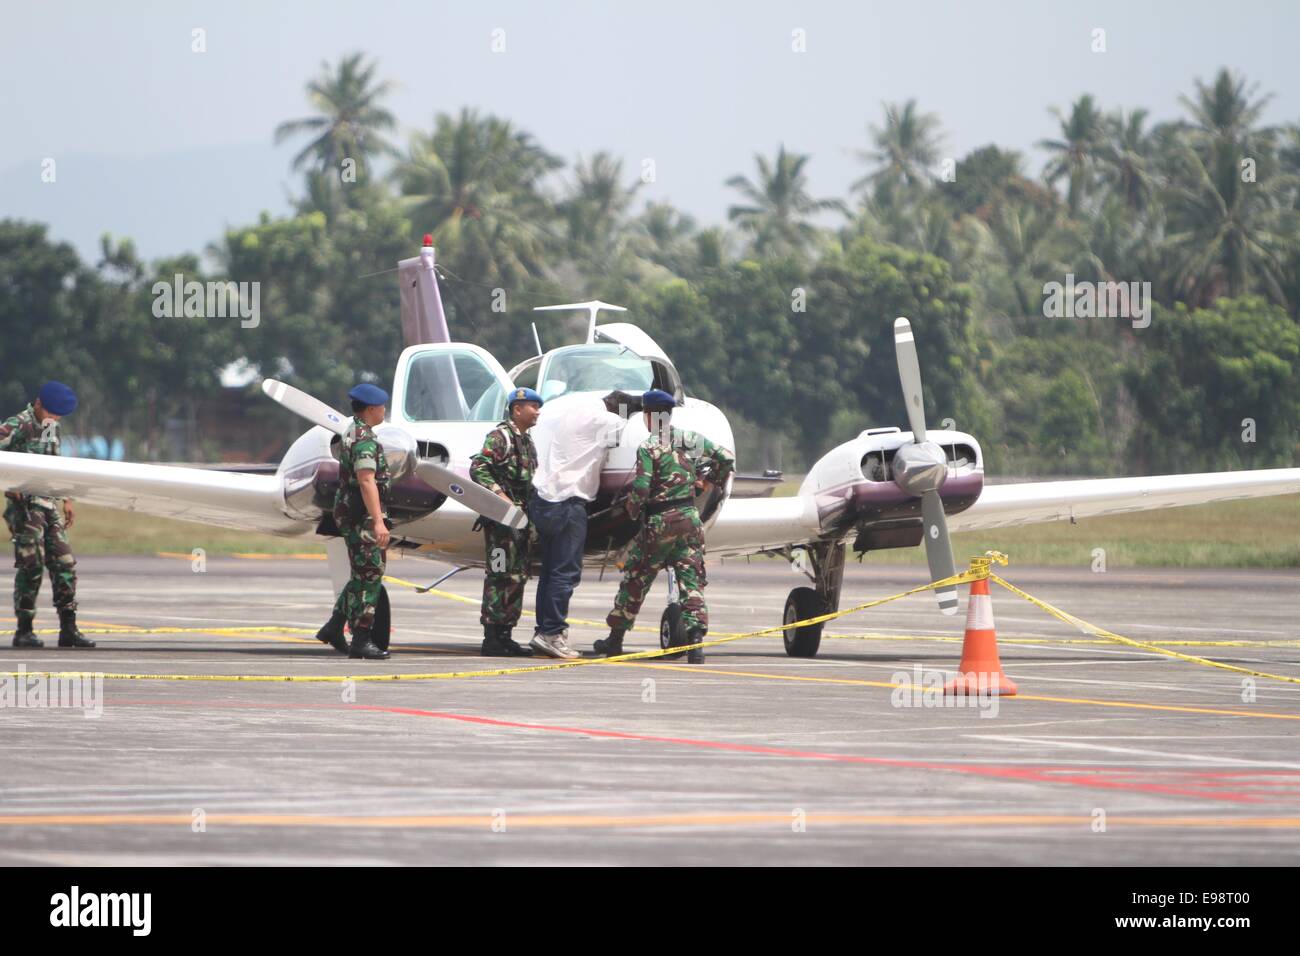 Manado, Indonesia. 22nd Oct, 2014. Indonesia air force check Beech Craft plane from Australia with captain's name was Graeme Paul Jackline, the co pilot was Richard Wayne Maclean after being forced down by Indonesia Sukhoi fighter jets at Sam Ratulangi airport on October 22, 2014 in Manado, North Sulawesi, Indonesia. A spokesman for the Indonesian air force, First Air Marshal Hadi Tjahjanto, said the civilian plane was detected this morning by radar off southern Maluku in eastern Indonesia. Credit:  ZUMA Press, Inc./Alamy Live News Stock Photo